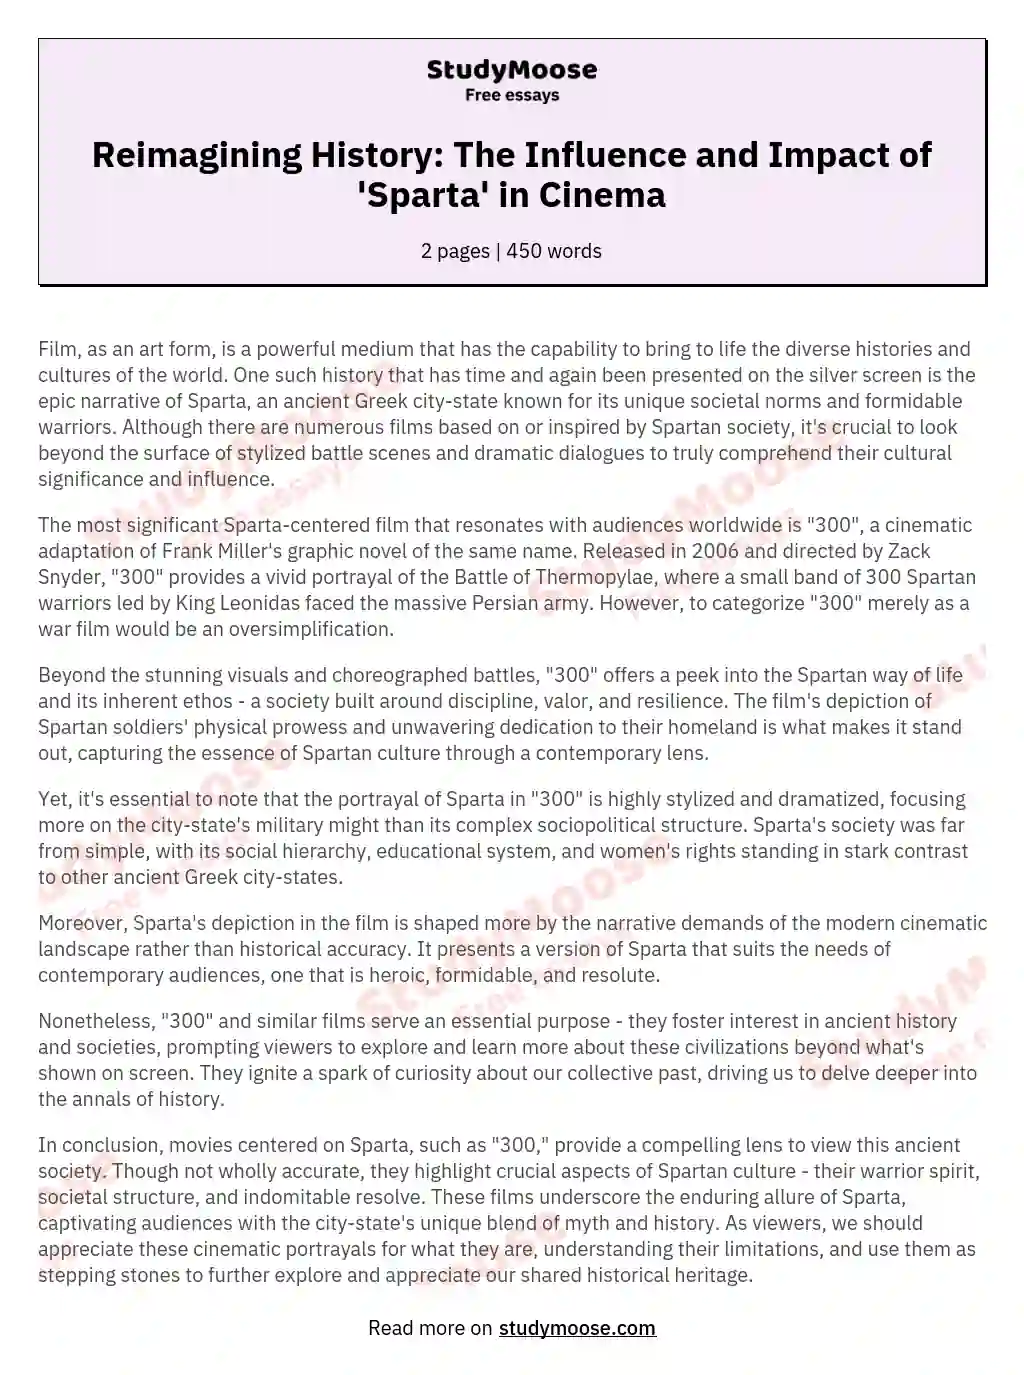 Reimagining History: The Influence and Impact of 'Sparta' in Cinema essay